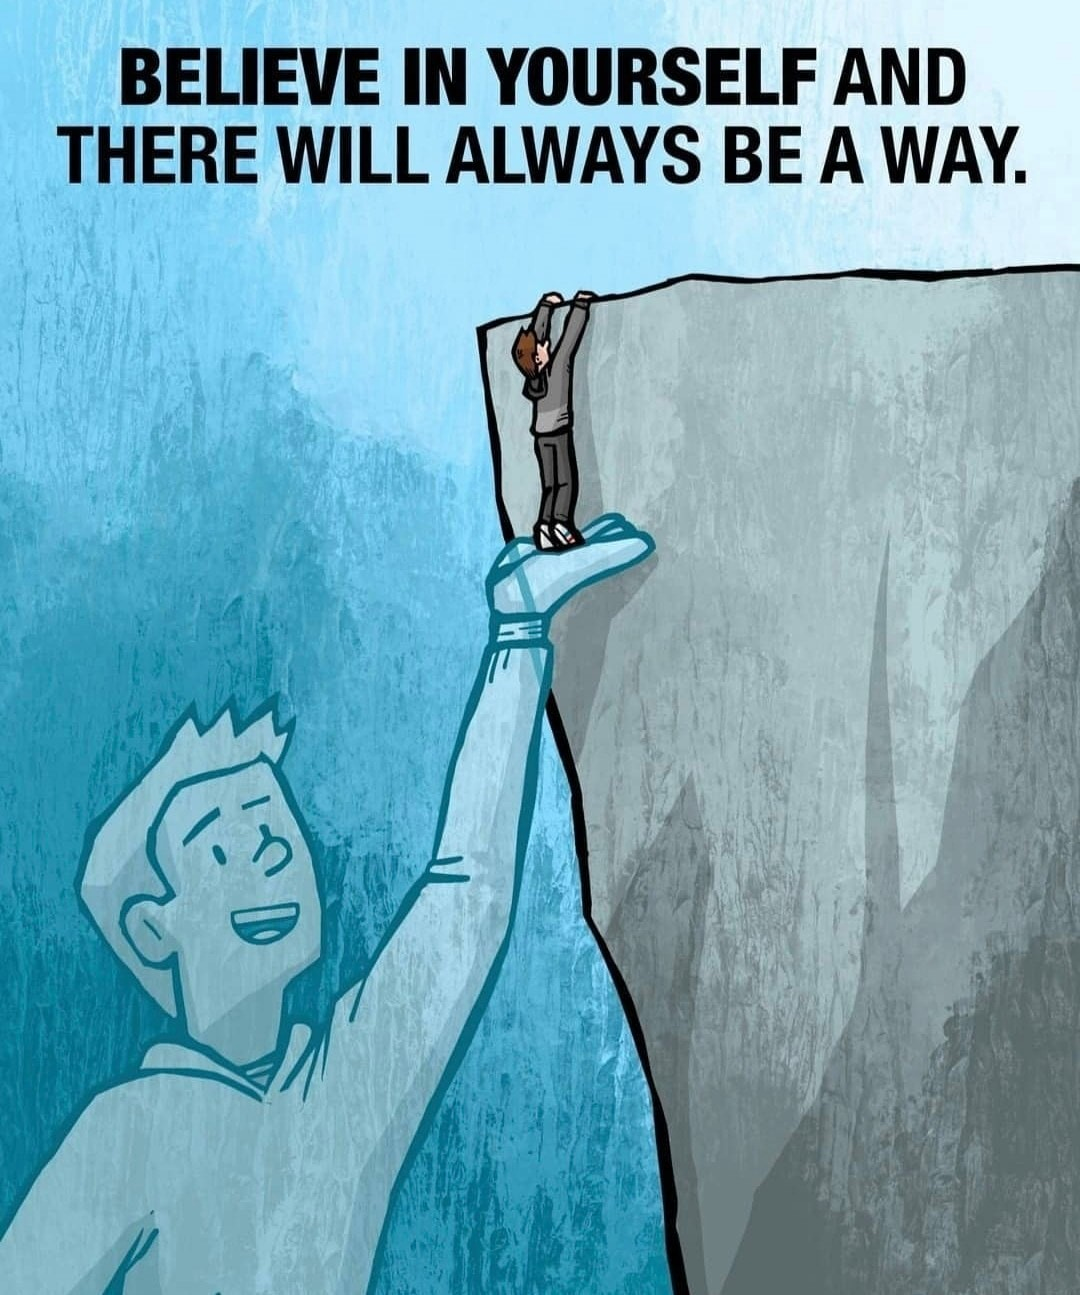 Believe in yourself and there will always be a way.